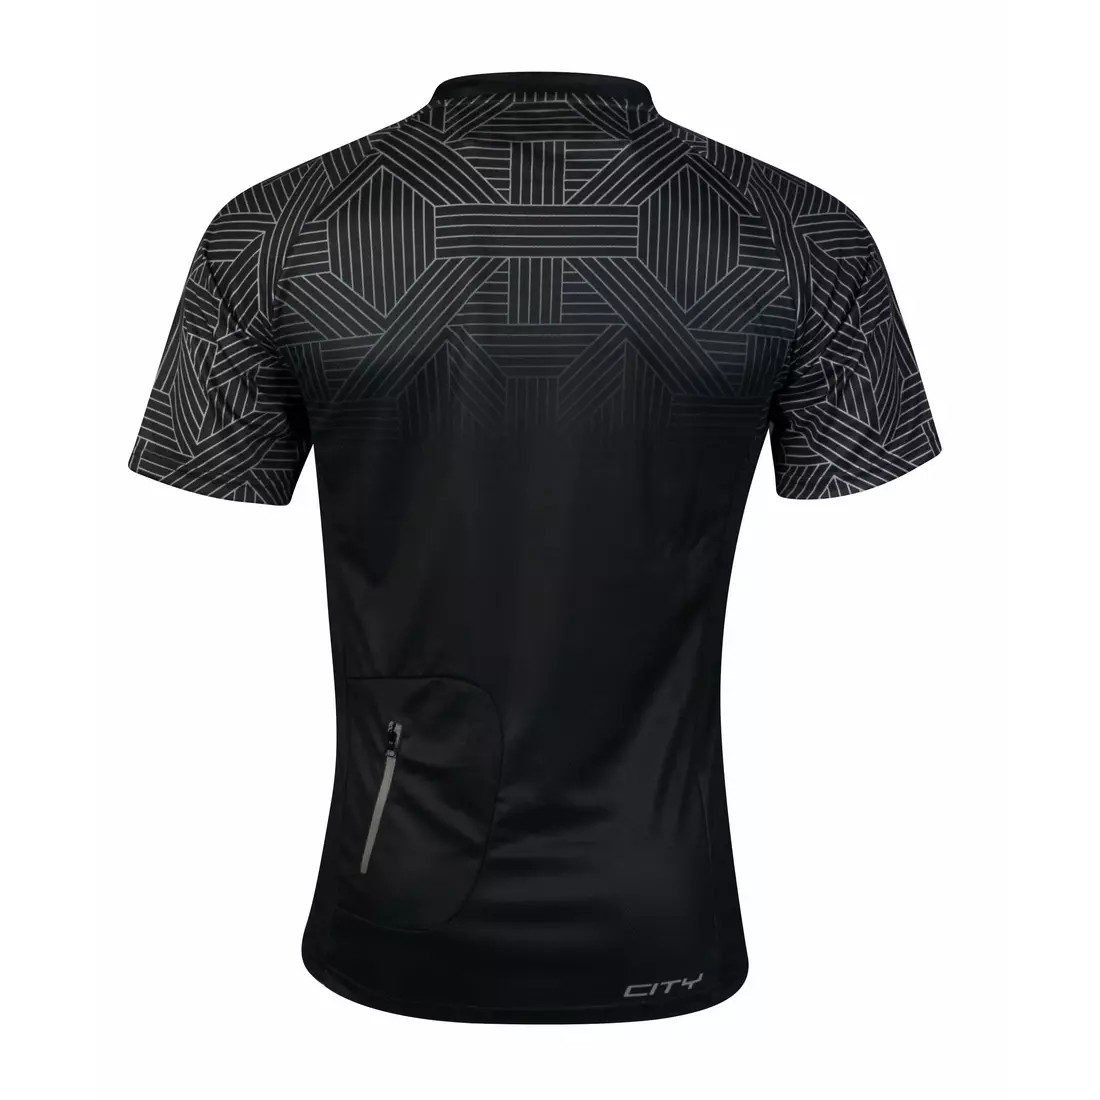 FORCE CITY men's black and gray MTB cycling jersey 9001535